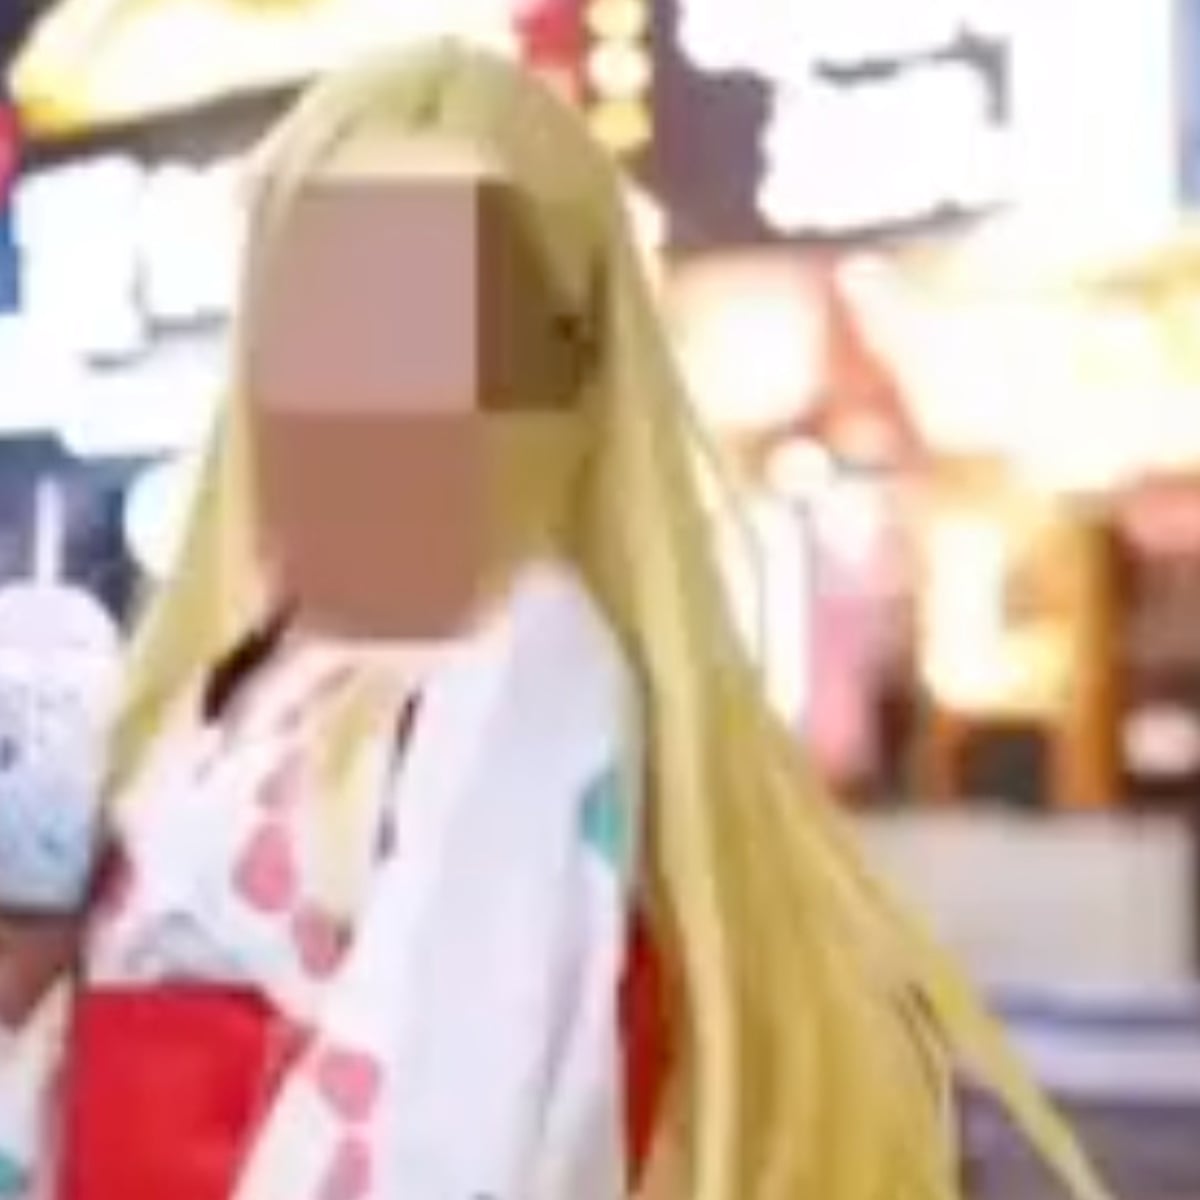 Chinese woman 'detained for wearing Japanese kimono' | China | The Guardian